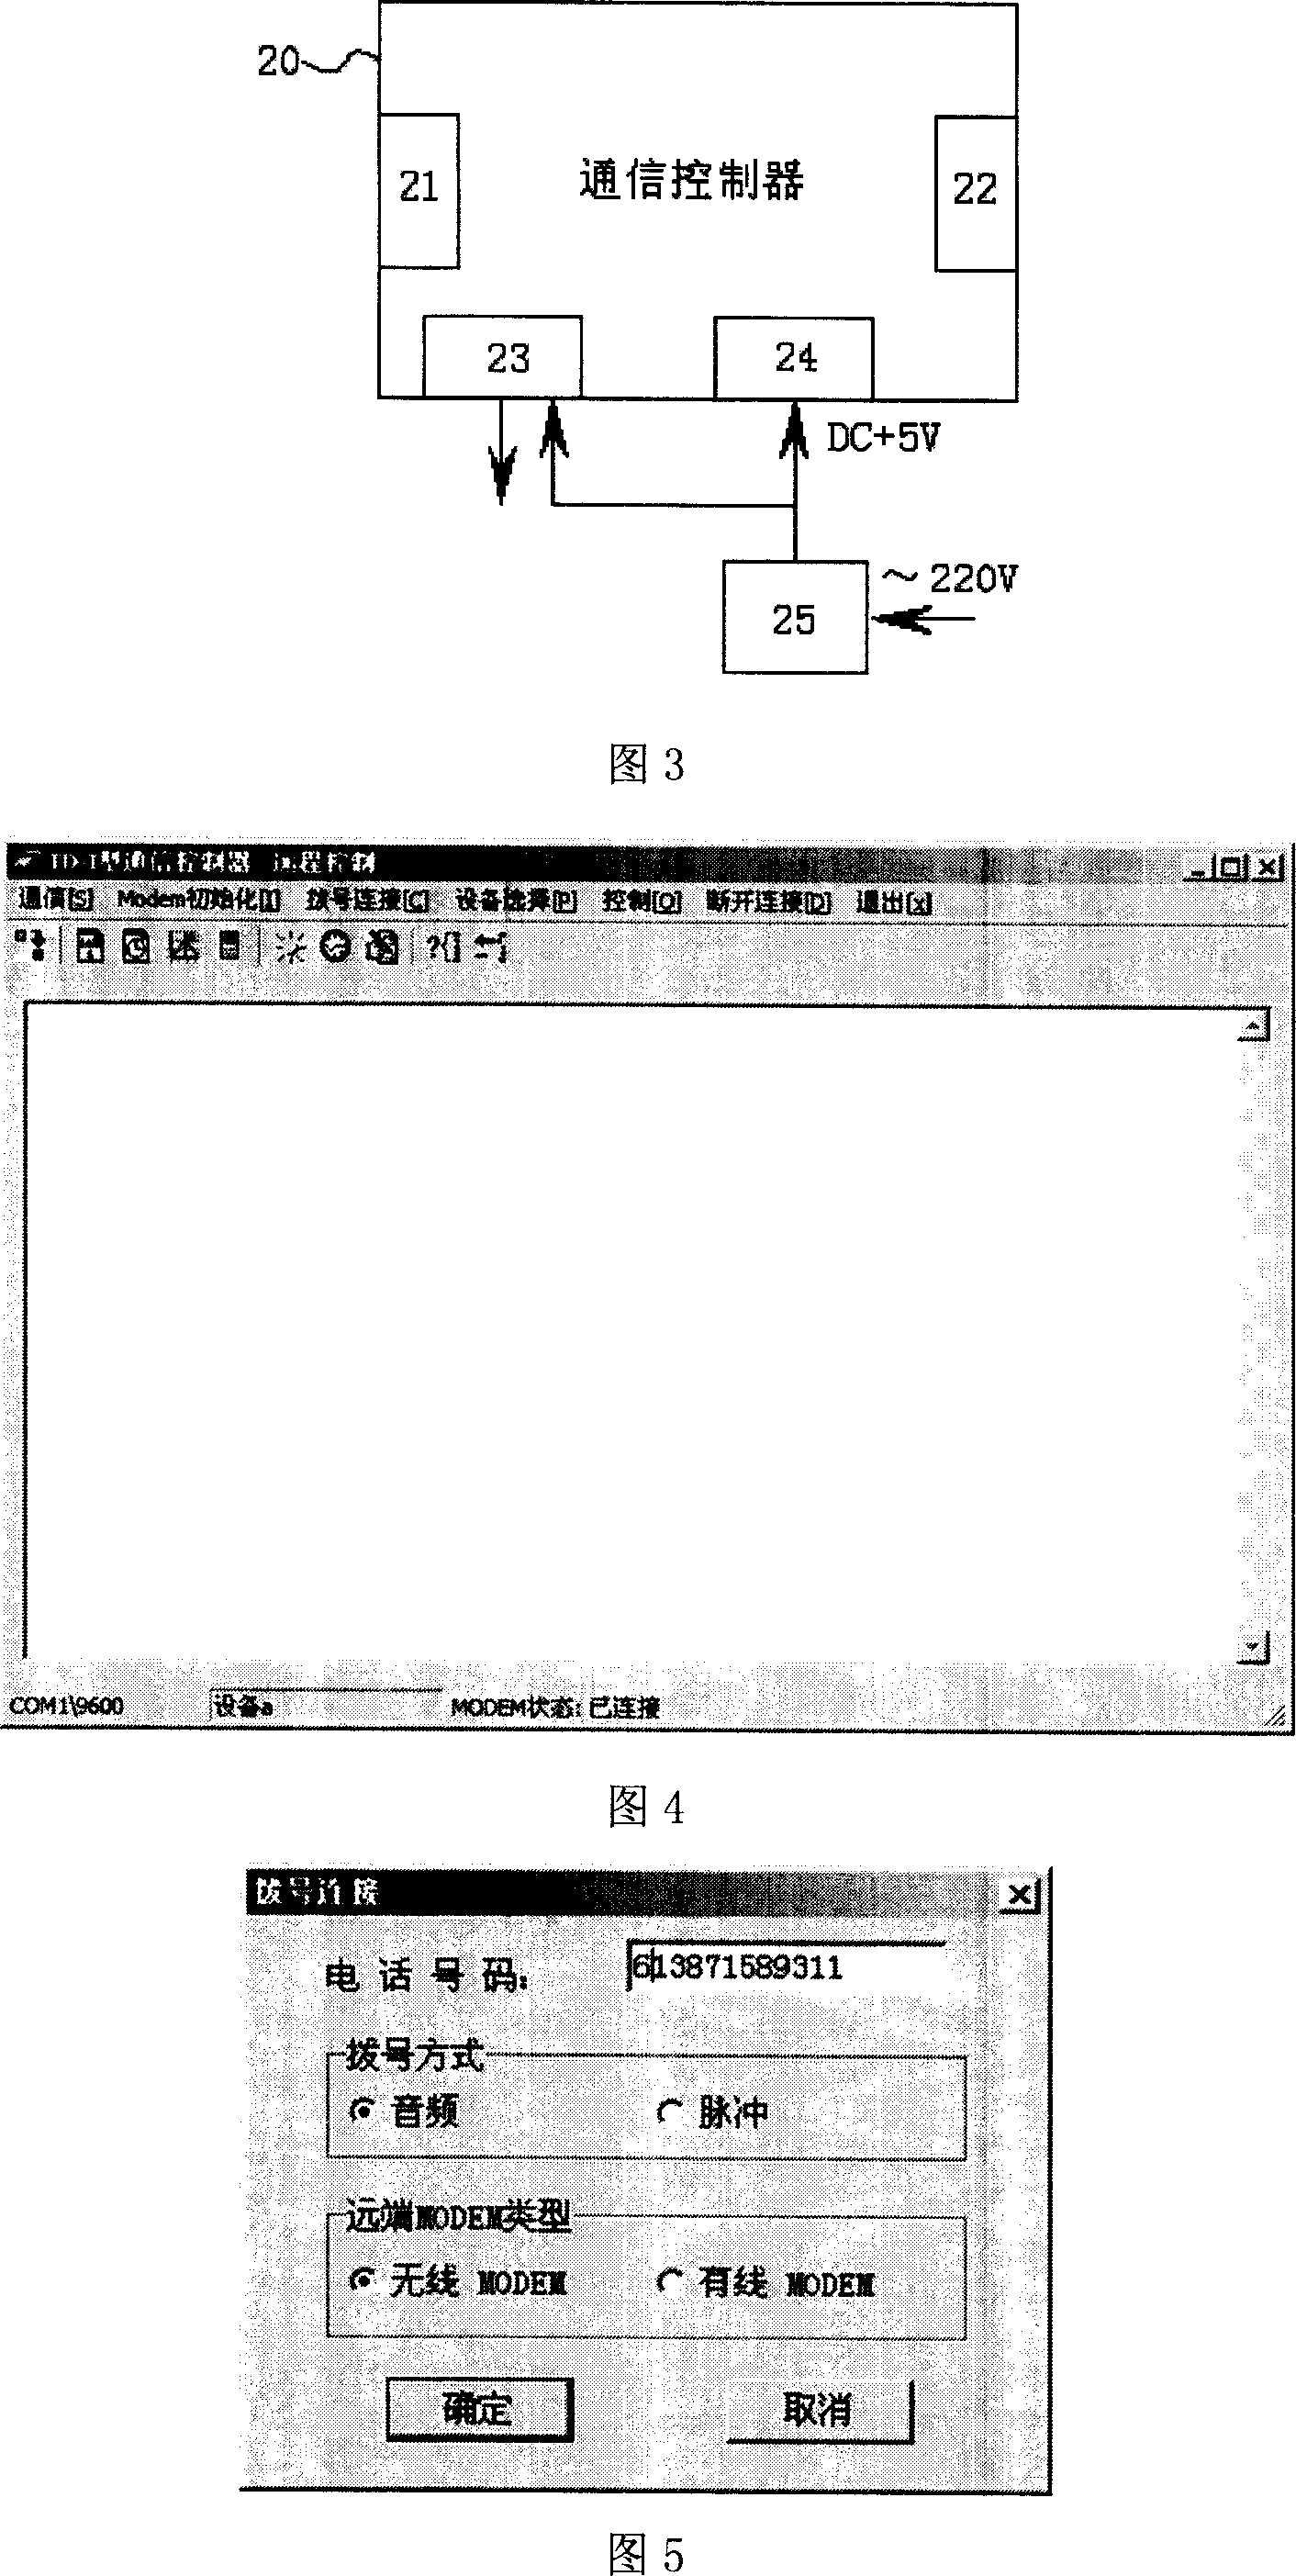 Digital monitoring wireless transmission method for geotechnical engineering and device therefor